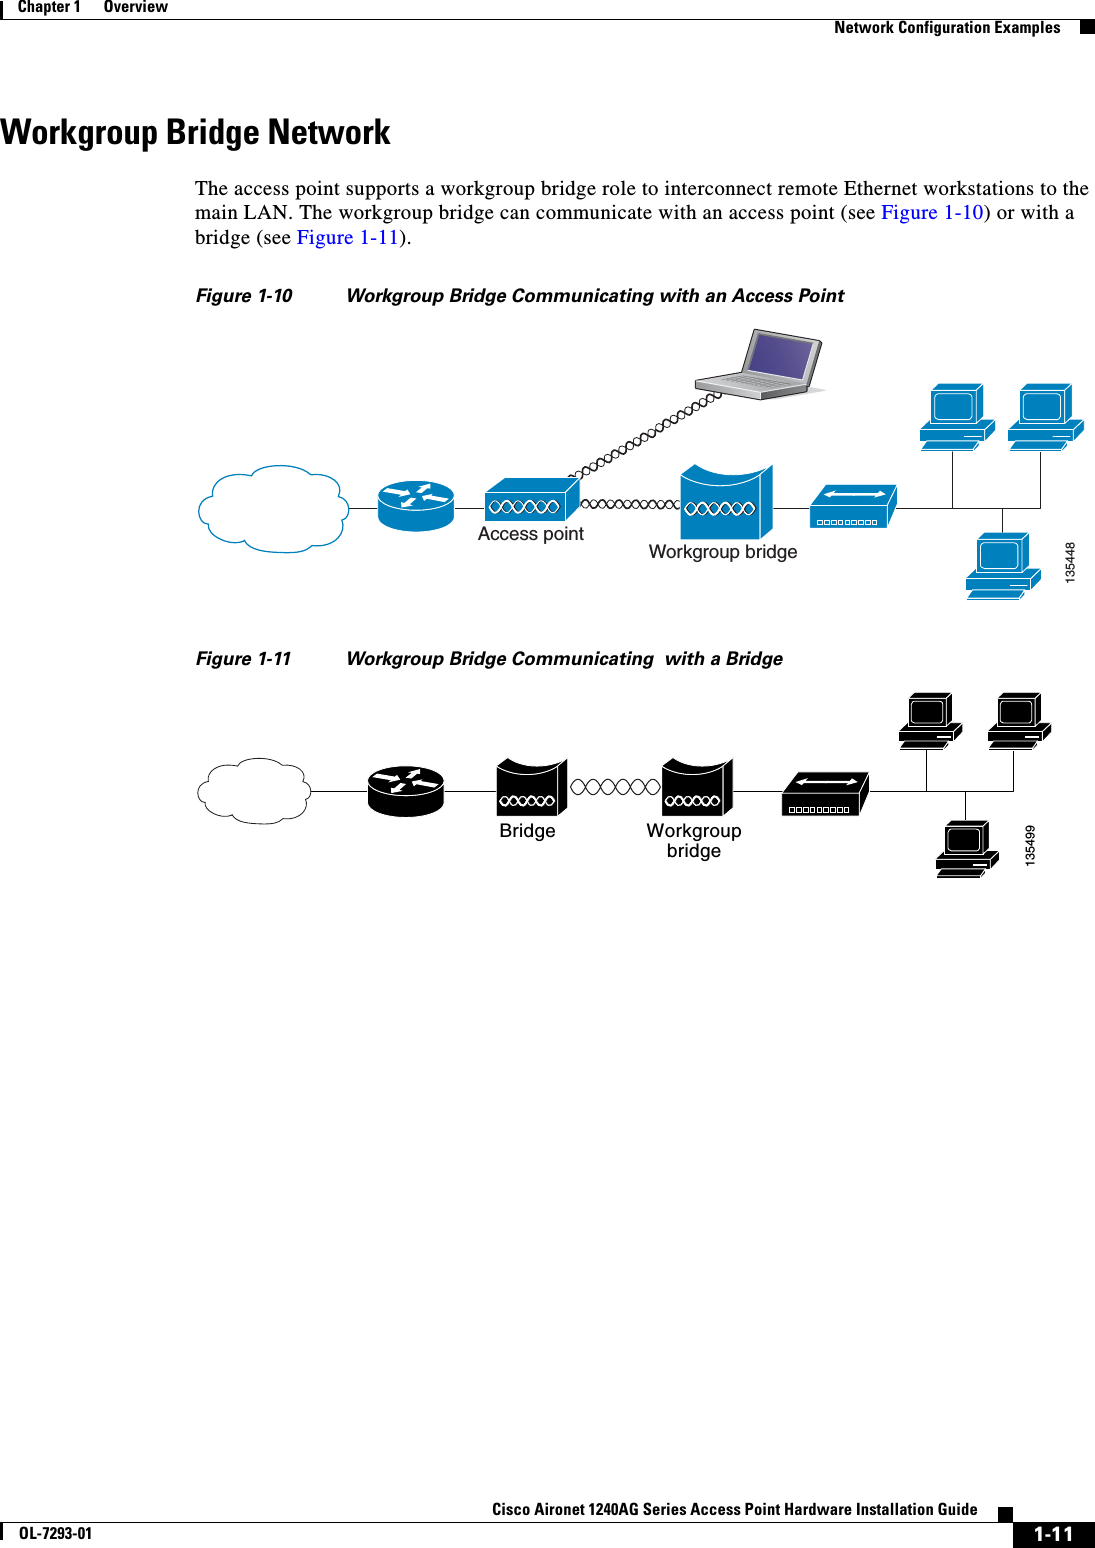  1-11Cisco Aironet 1240AG Series Access Point Hardware Installation GuideOL-7293-01Chapter 1      OverviewNetwork Configuration ExamplesWorkgroup Bridge NetworkThe access point supports a workgroup bridge role to interconnect remote Ethernet workstations to the main LAN. The workgroup bridge can communicate with an access point (see Figure 1-10) or with a bridge (see Figure 1-11).Figure 1-10 Workgroup Bridge Communicating with an Access Point Figure 1-11 Workgroup Bridge Communicating  with a Bridge Access point Workgroup bridge135448Bridge Workgroupbridge135499